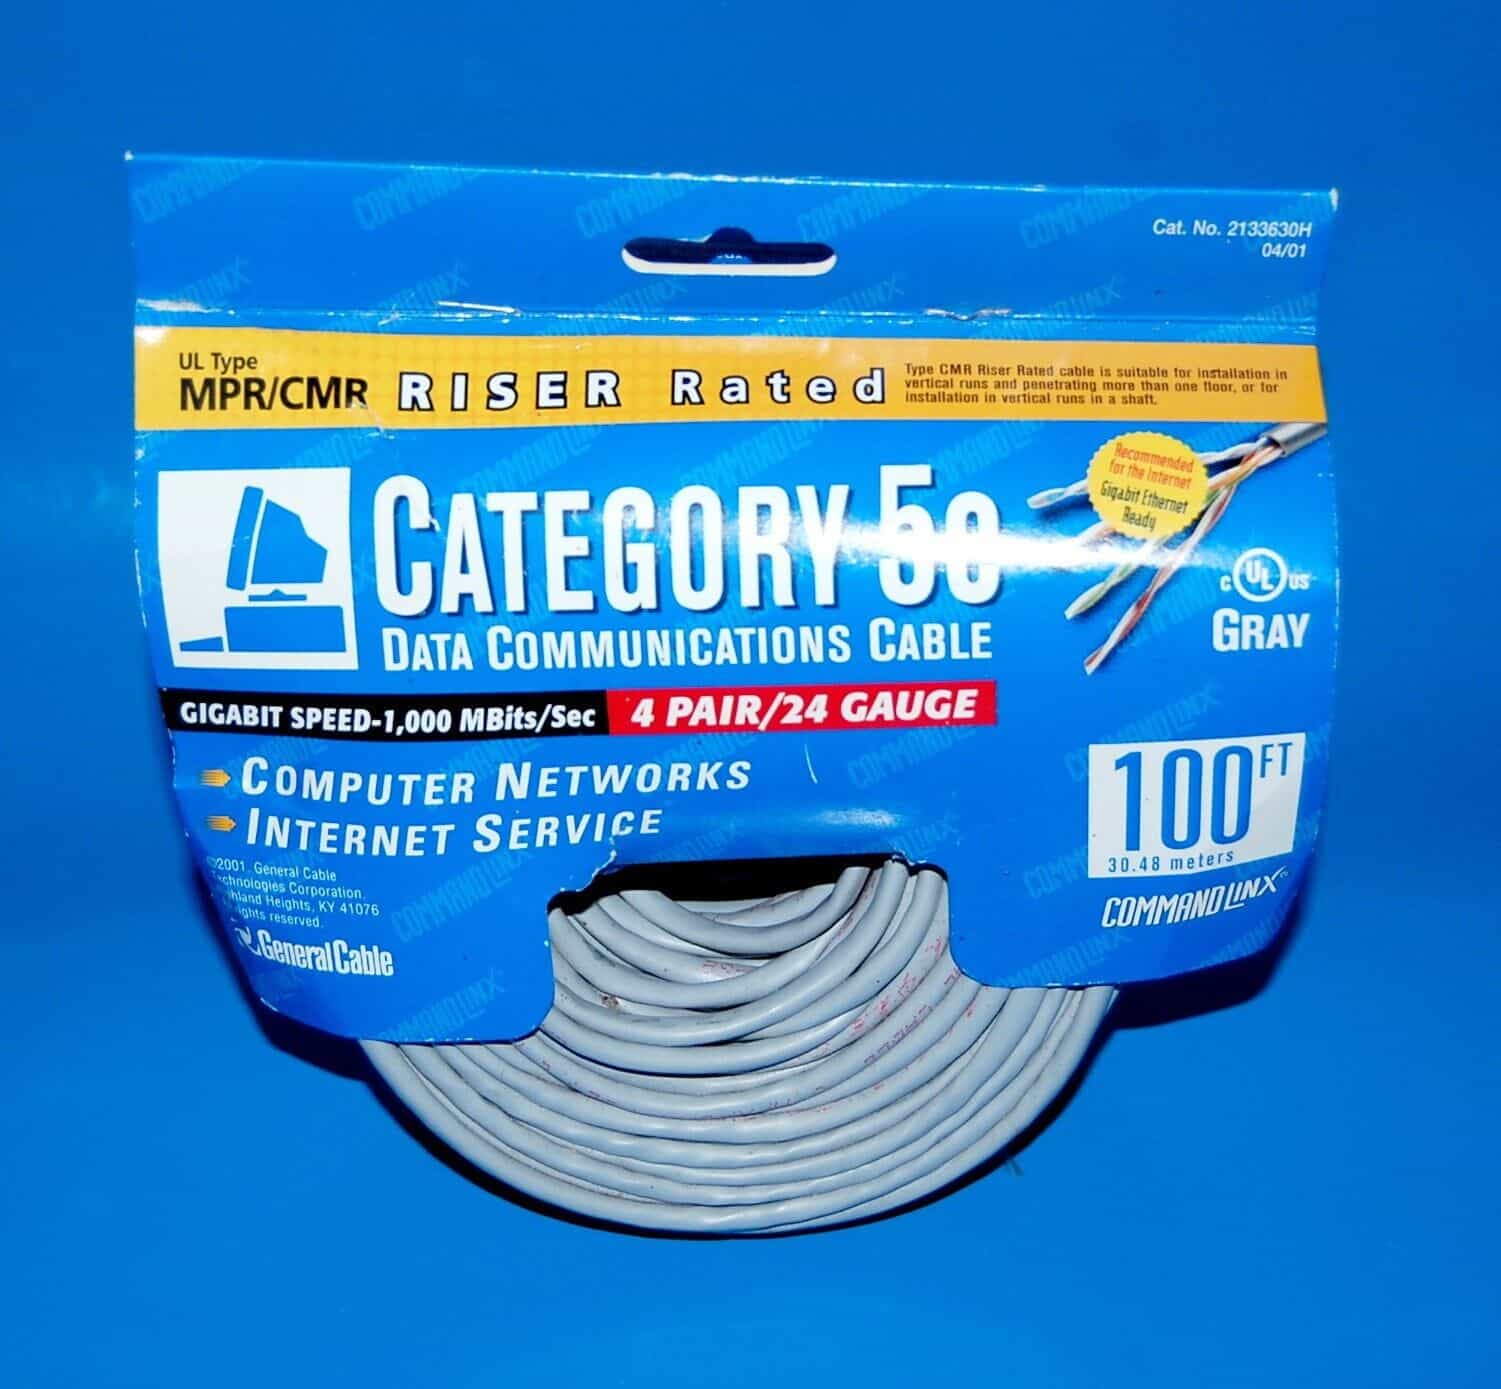 General Cable 100 FT OF CATEGORY 5e 4 Pair/24 Gauge RISER RATED Cable | Gray